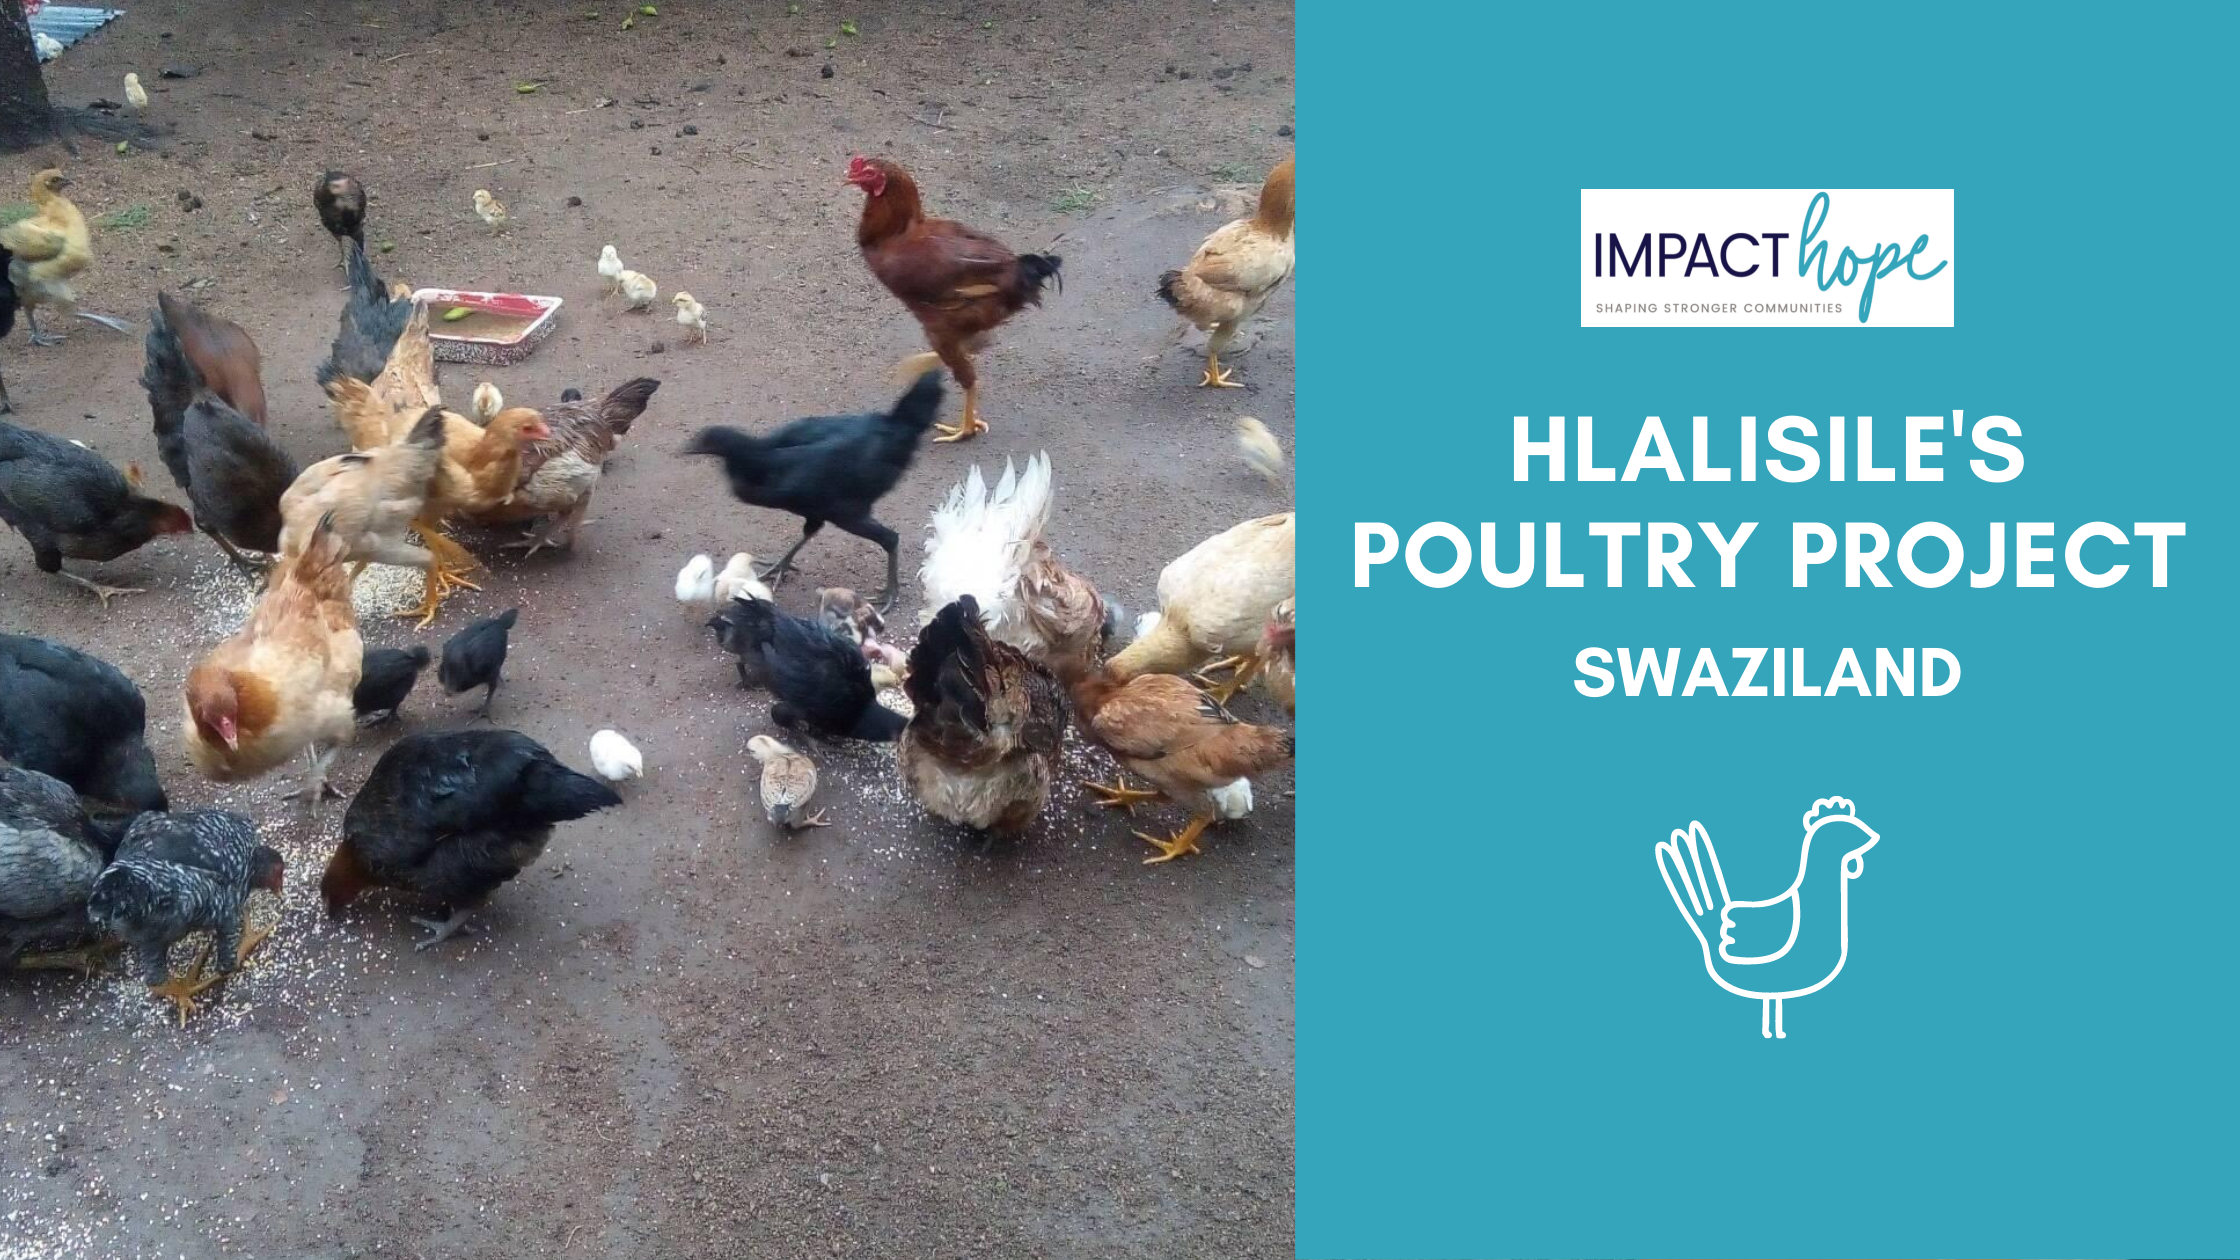 Hlalisile's Poultry Project